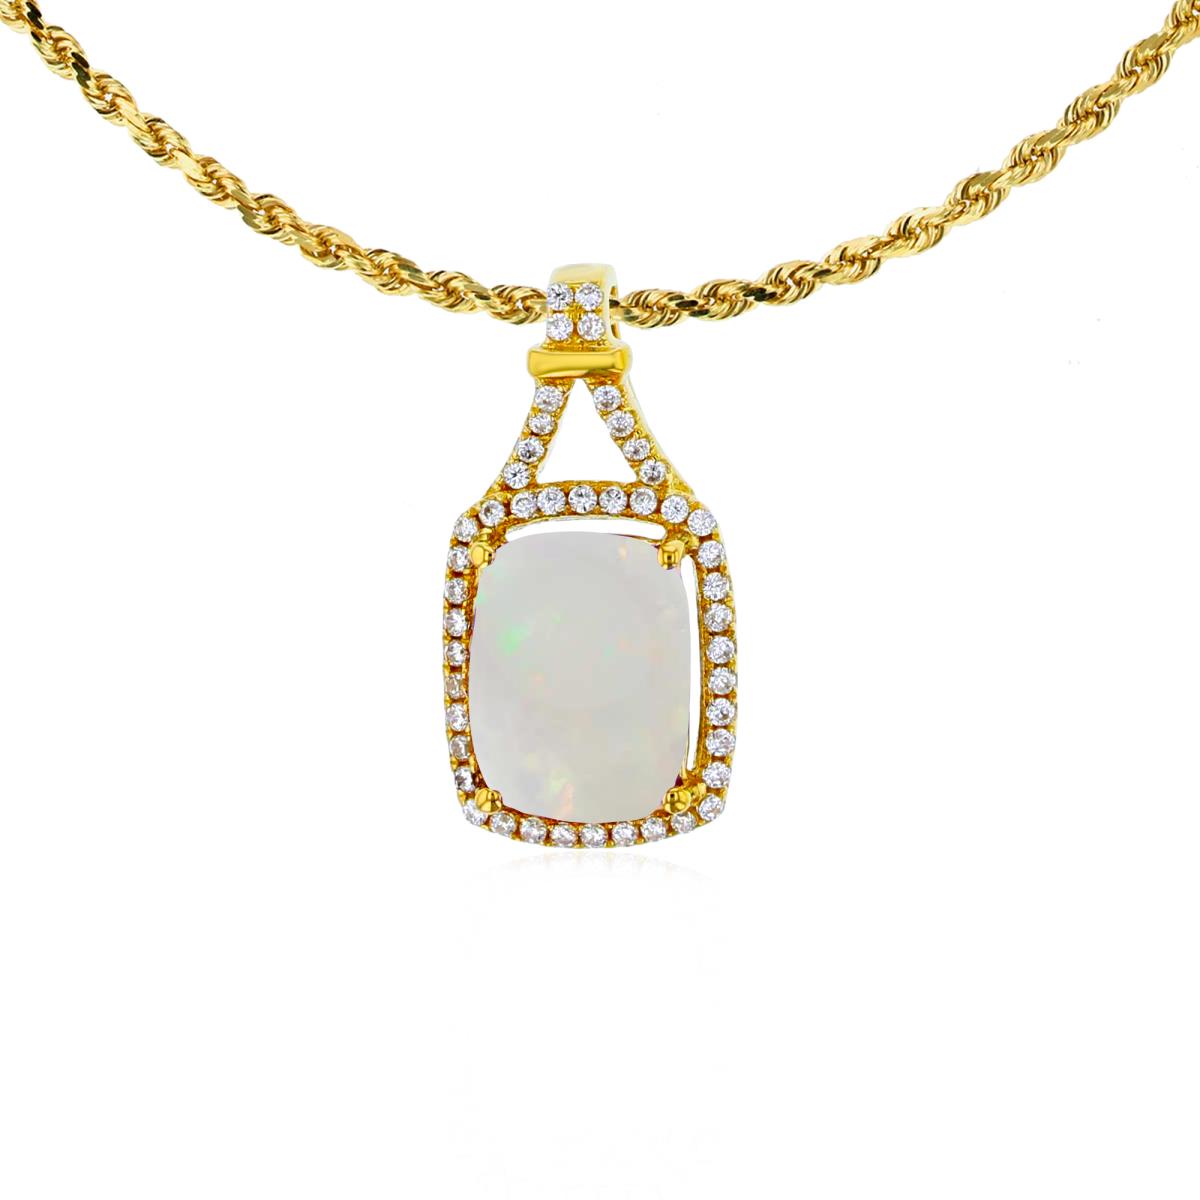 14K Yellow Gold 8x6mm Cushion Opal & 0.13 CTTW Rd Diamonds Halo 18" Rope Chain Necklace